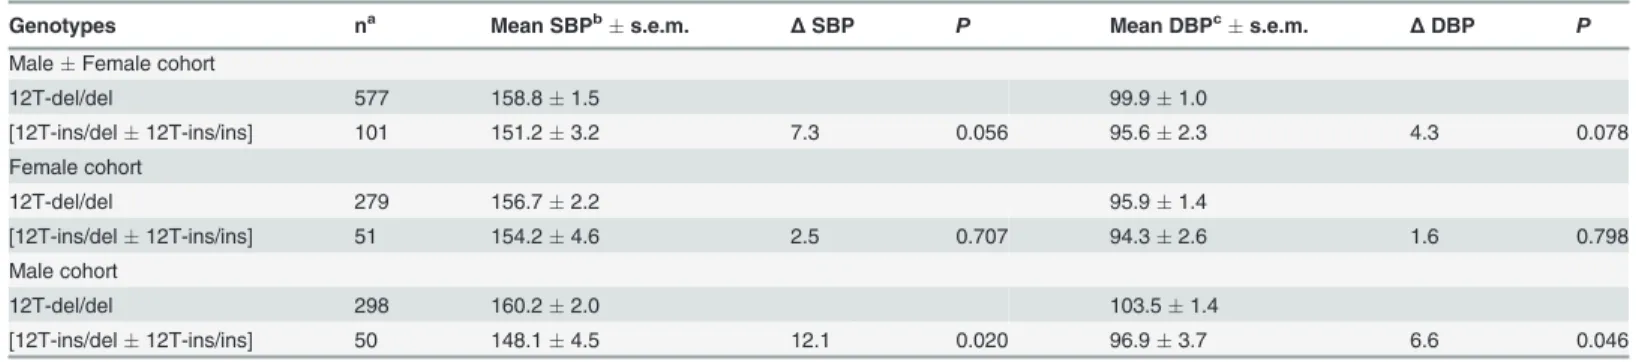 Table 3. Analysis of ATP1A1 (12T-ins/del) variants based on blood pressure as a quantitative trait.